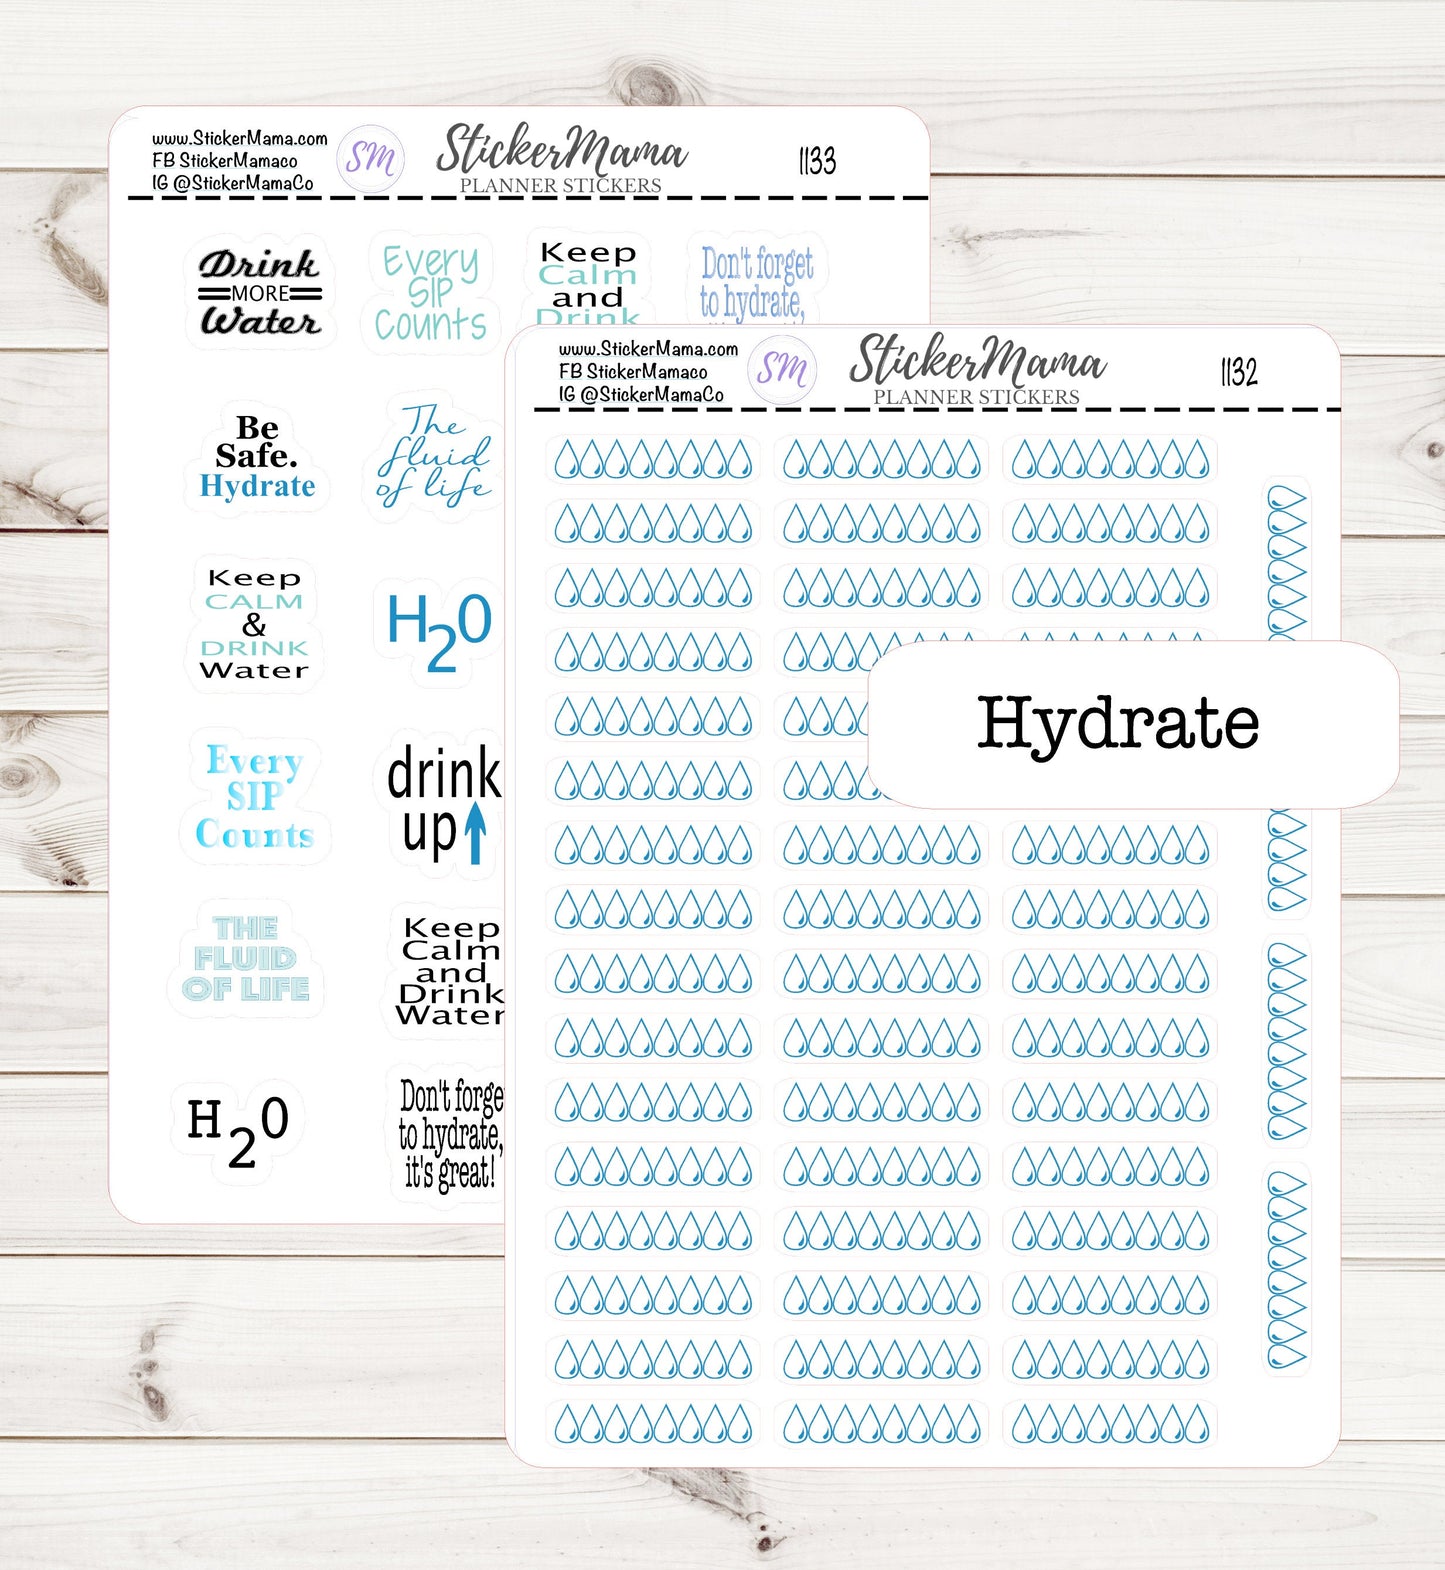 HYDRATE STICKERS 1132 1133 Planner Stickers Water Intake Stickers H20 Stickers Water Quote Planner Stickers